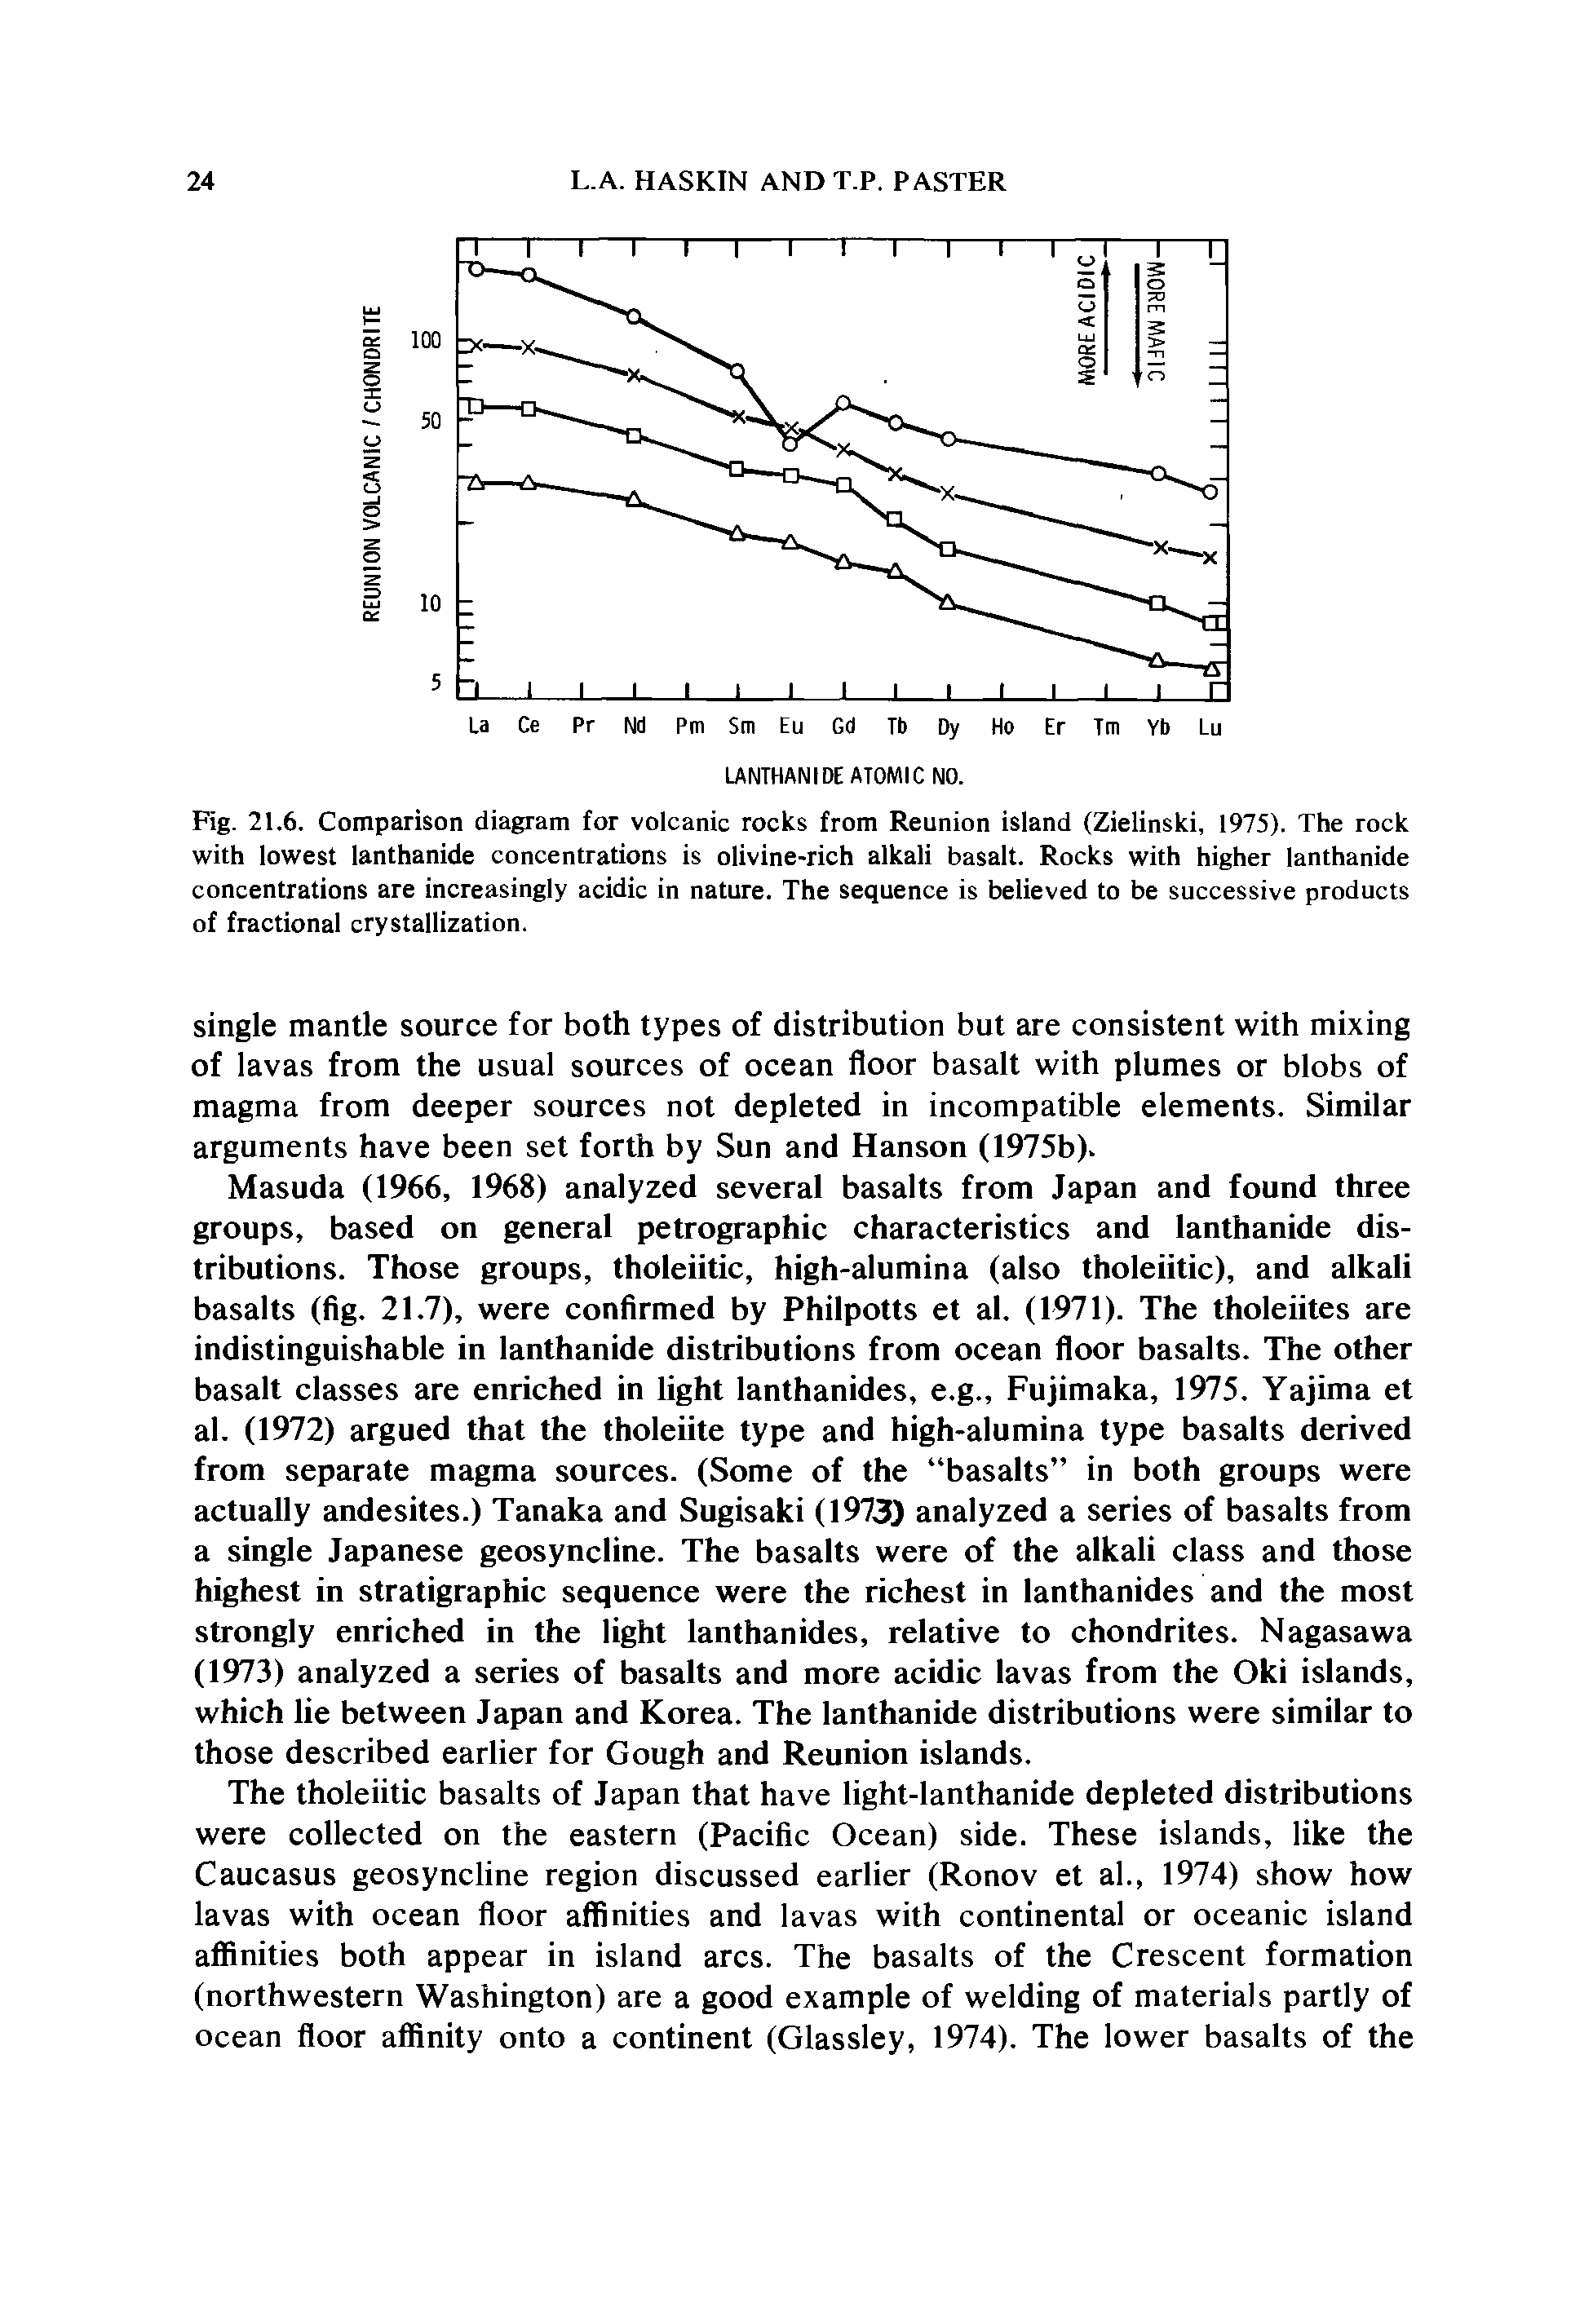 Fig. 21.6. Comparison diagram for volcanic rocks from Reunion island (Zielinski, 1975). The rock with lowest lanthanide concentrations is olivine-rich alkali basalt. Rocks with higher lanthanide concentrations are increasingly acidic in nature. The sequence is believed to be successive products of fractional crystallization.